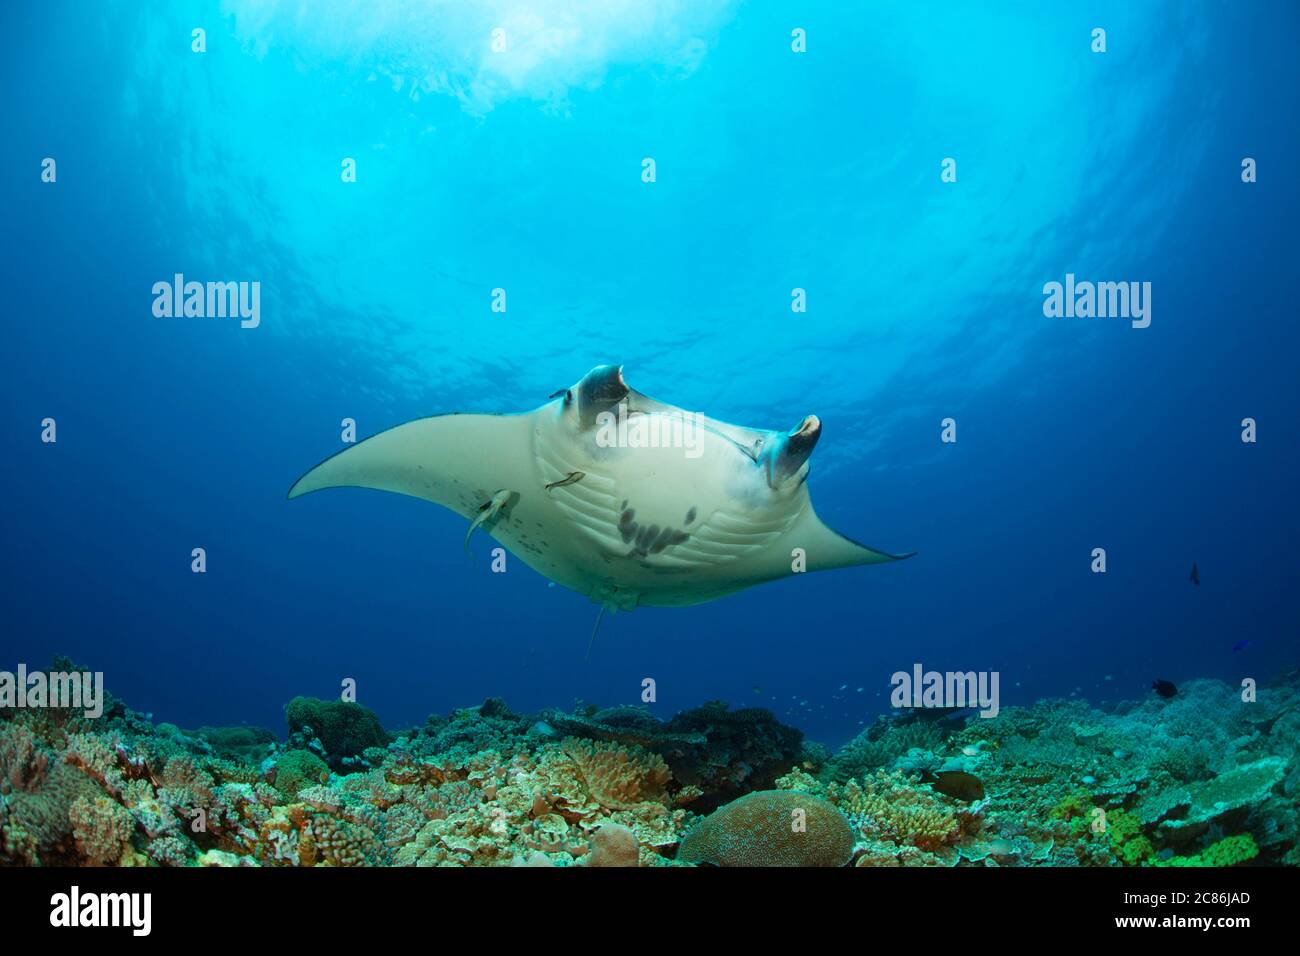 A manta ray, Manta alfredi, gets close to the reef to be inspected by a small cleaner wrasse, Fiji. Stock Photo